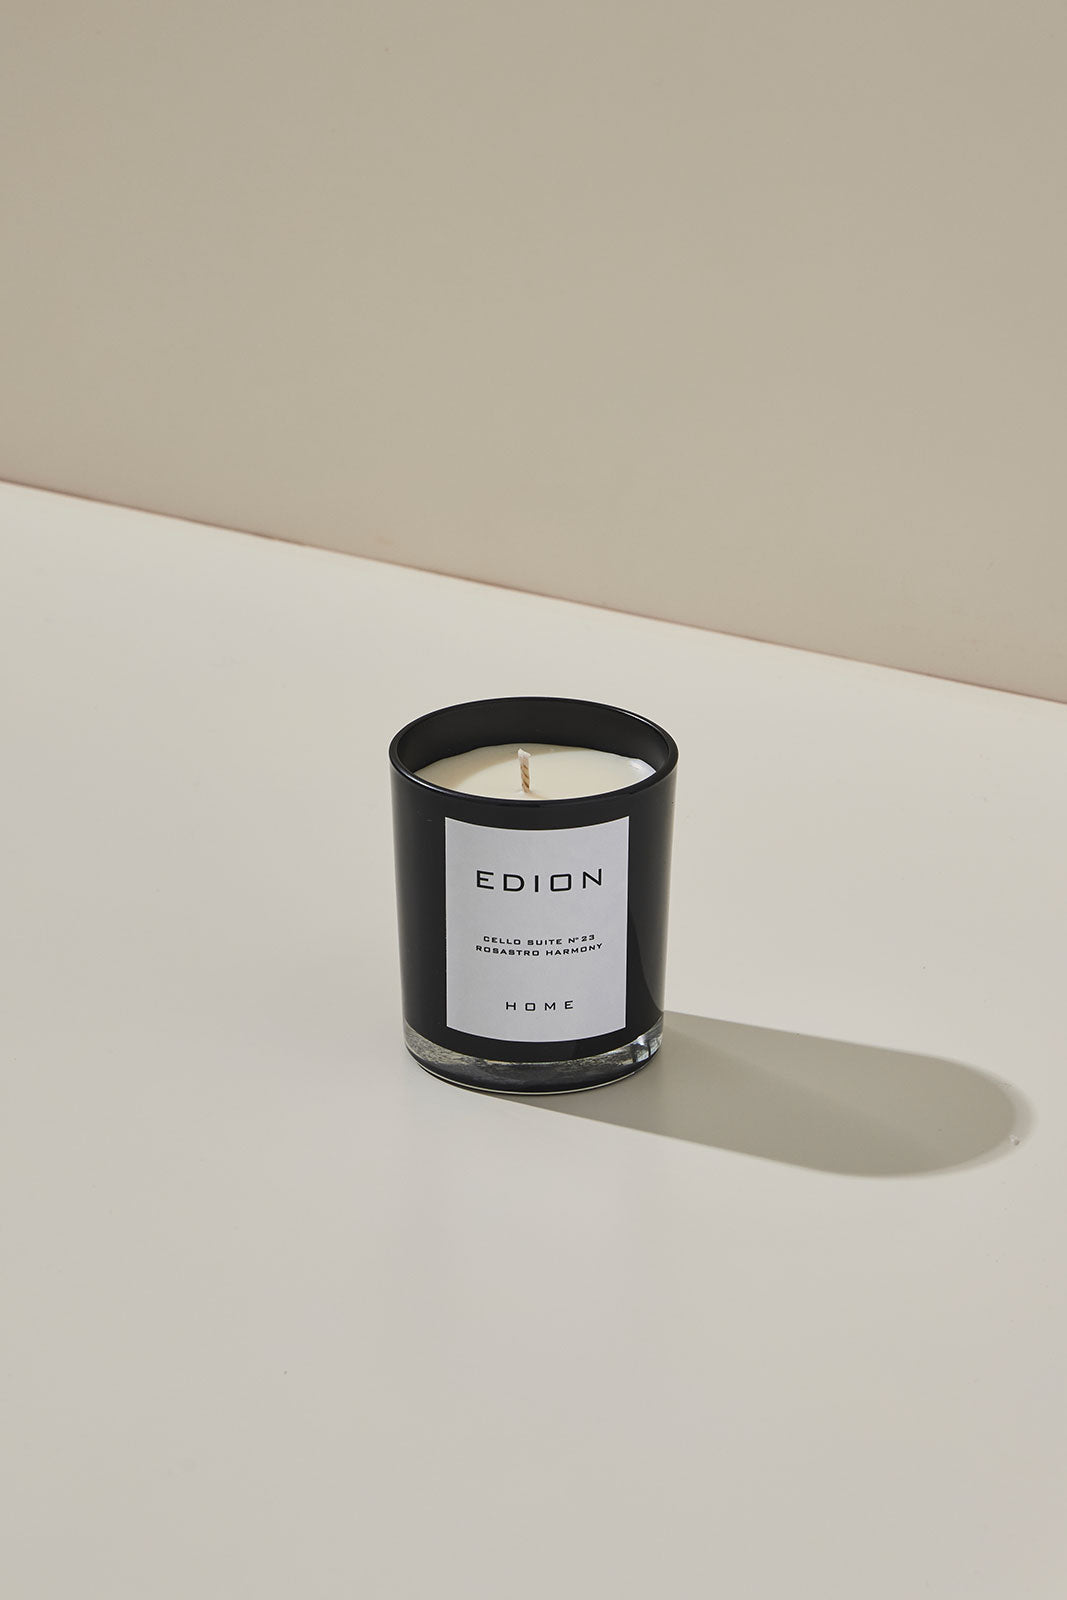 Scented candle Cello suite n. 23 Pinkish Harmony